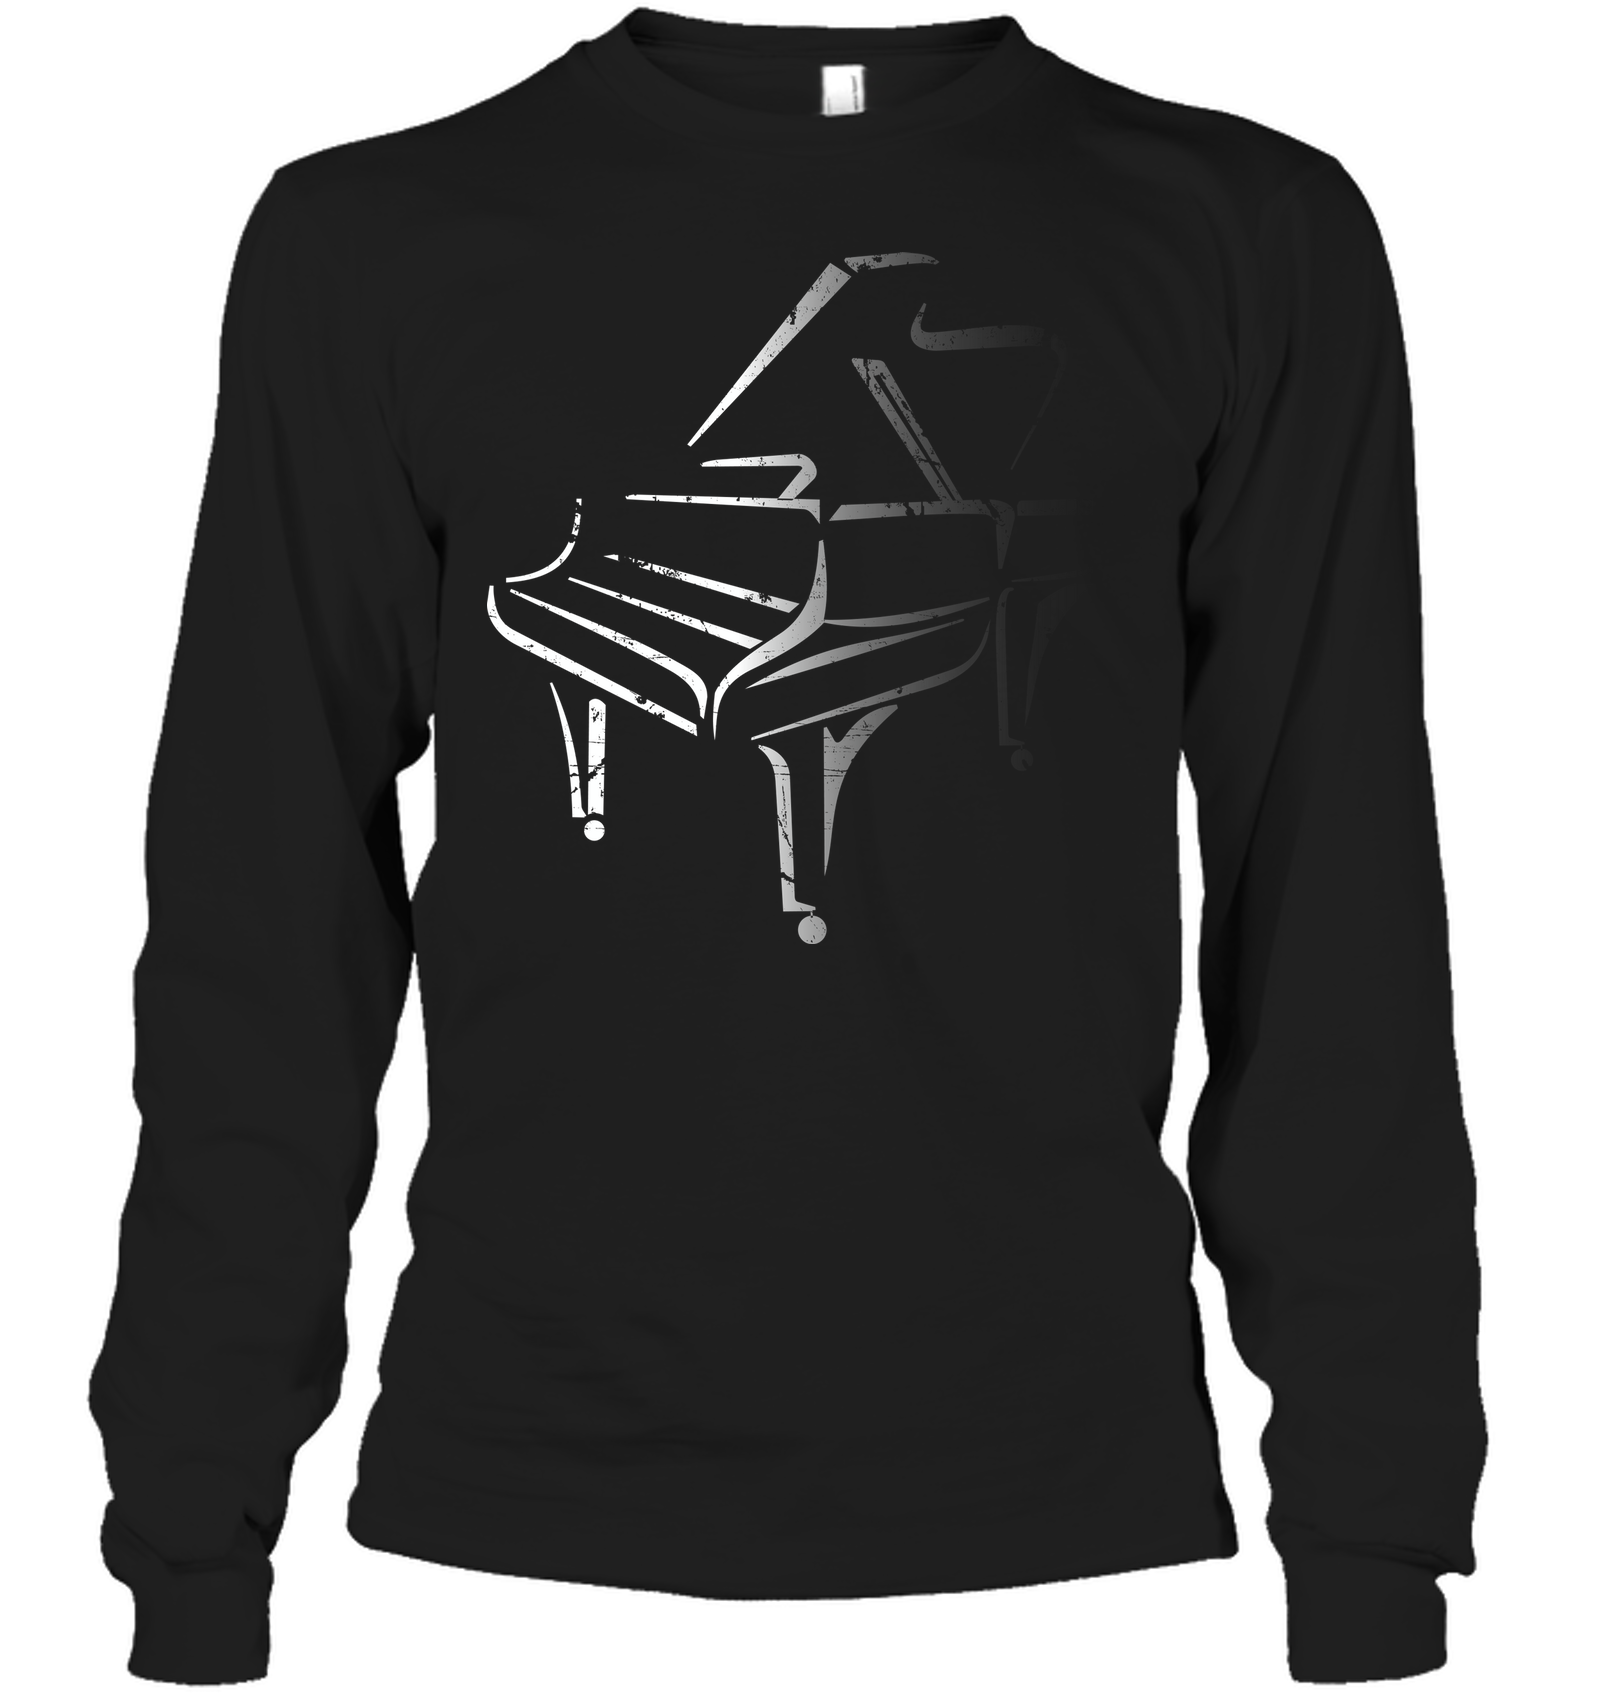 White Piano in the Shadows - Gildan Adult Classic Long Sleeve T-Shirt